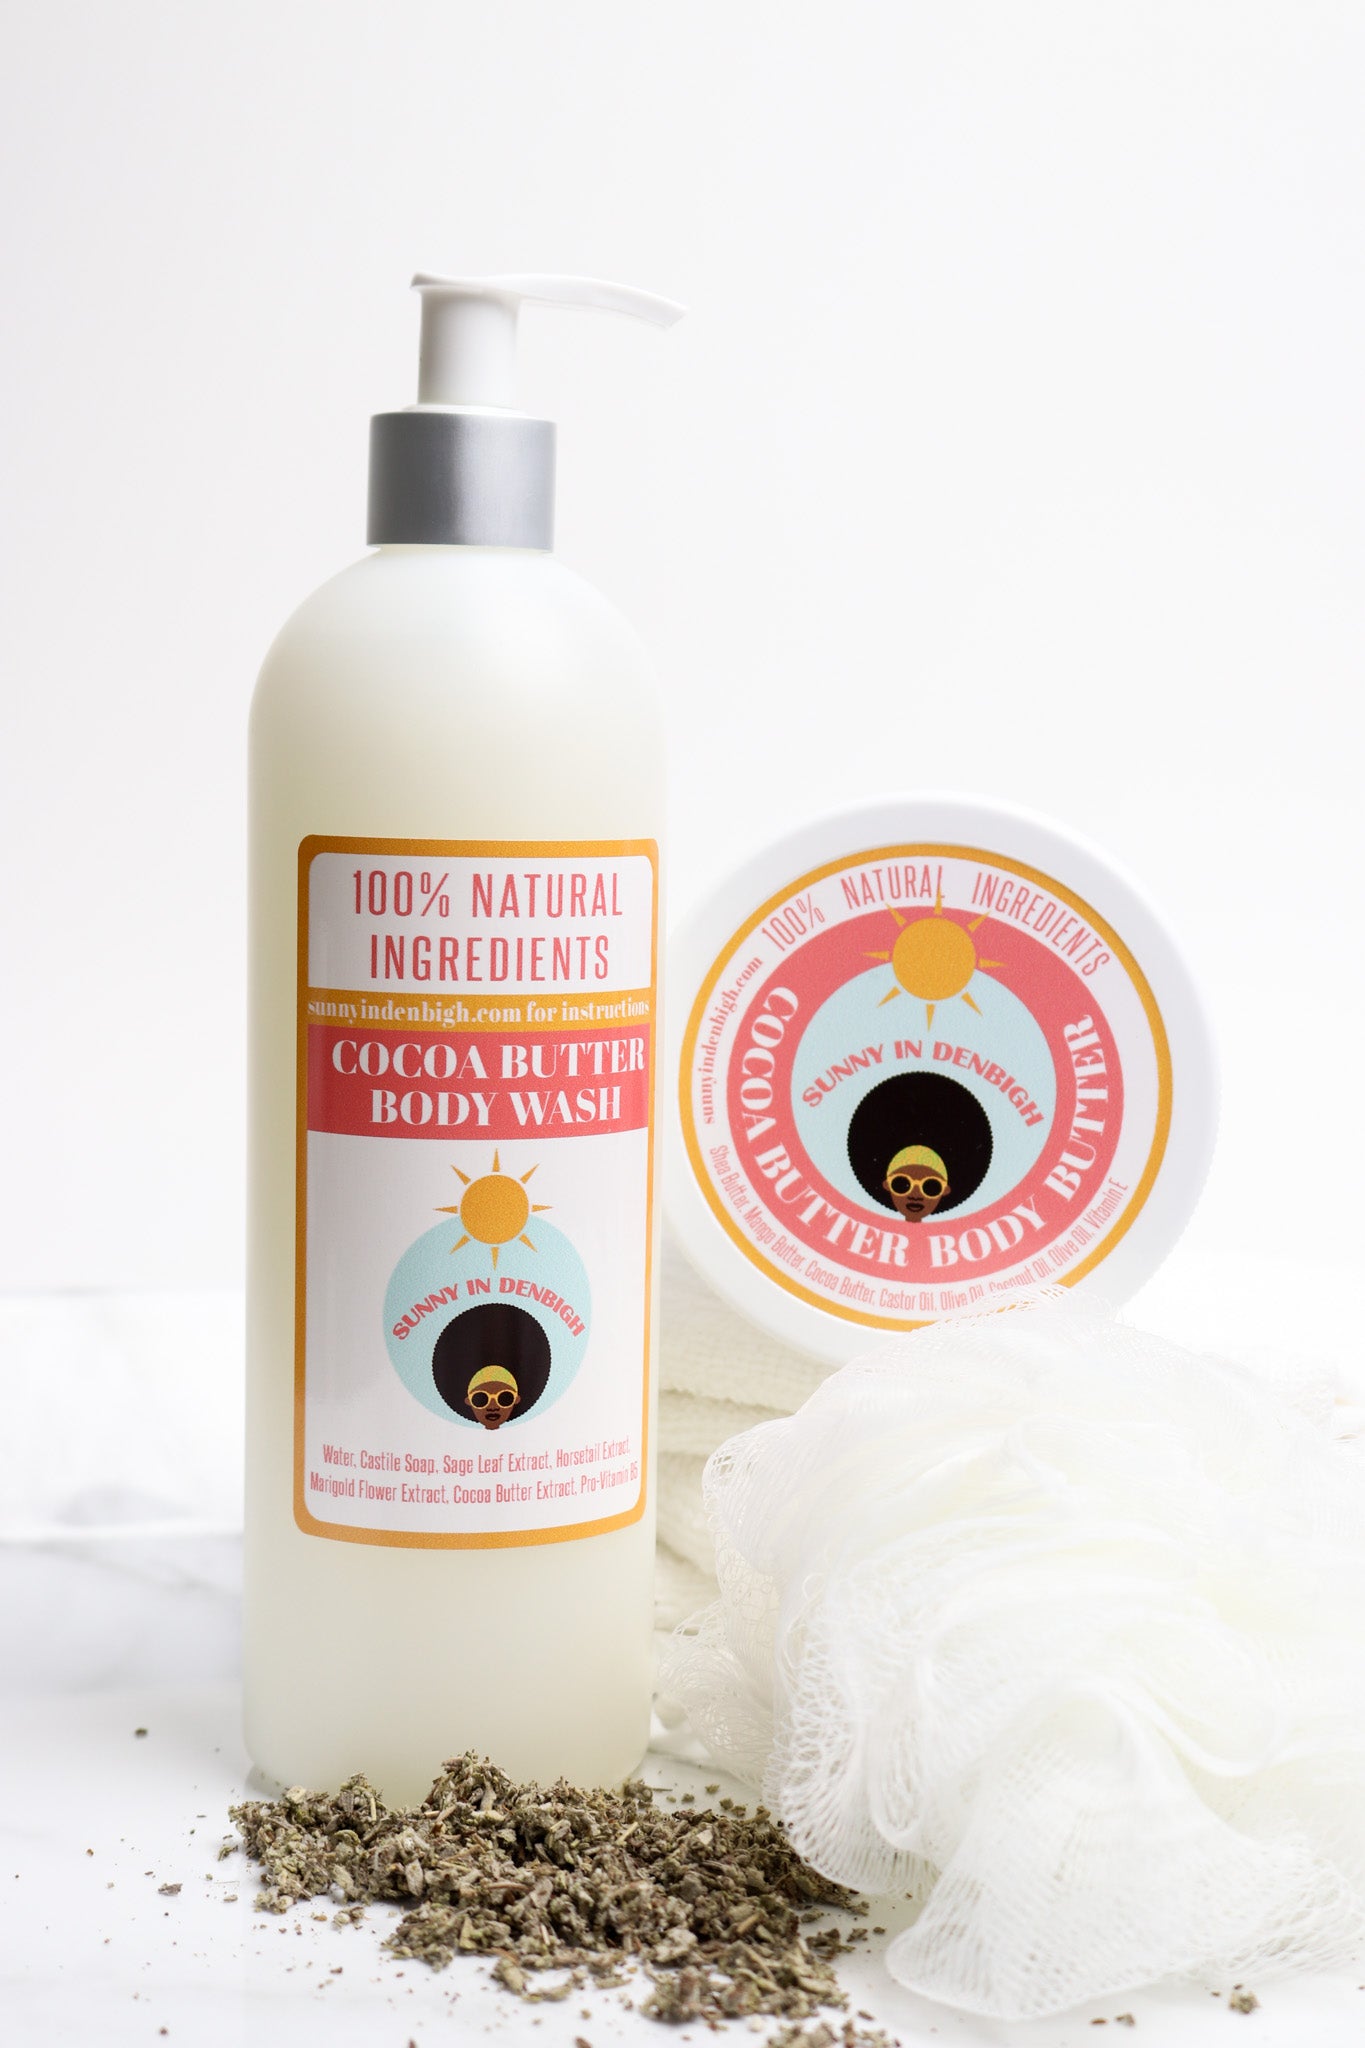 Sunny In Denbigh Cocoa Butter Bath Bundle. Our Cocoa butter bath bundle is the skin care bundle you absolutely need. Cocoa butter body wash and body butter combination allows you to hydrate your skin and lock in moisture like you never have before.